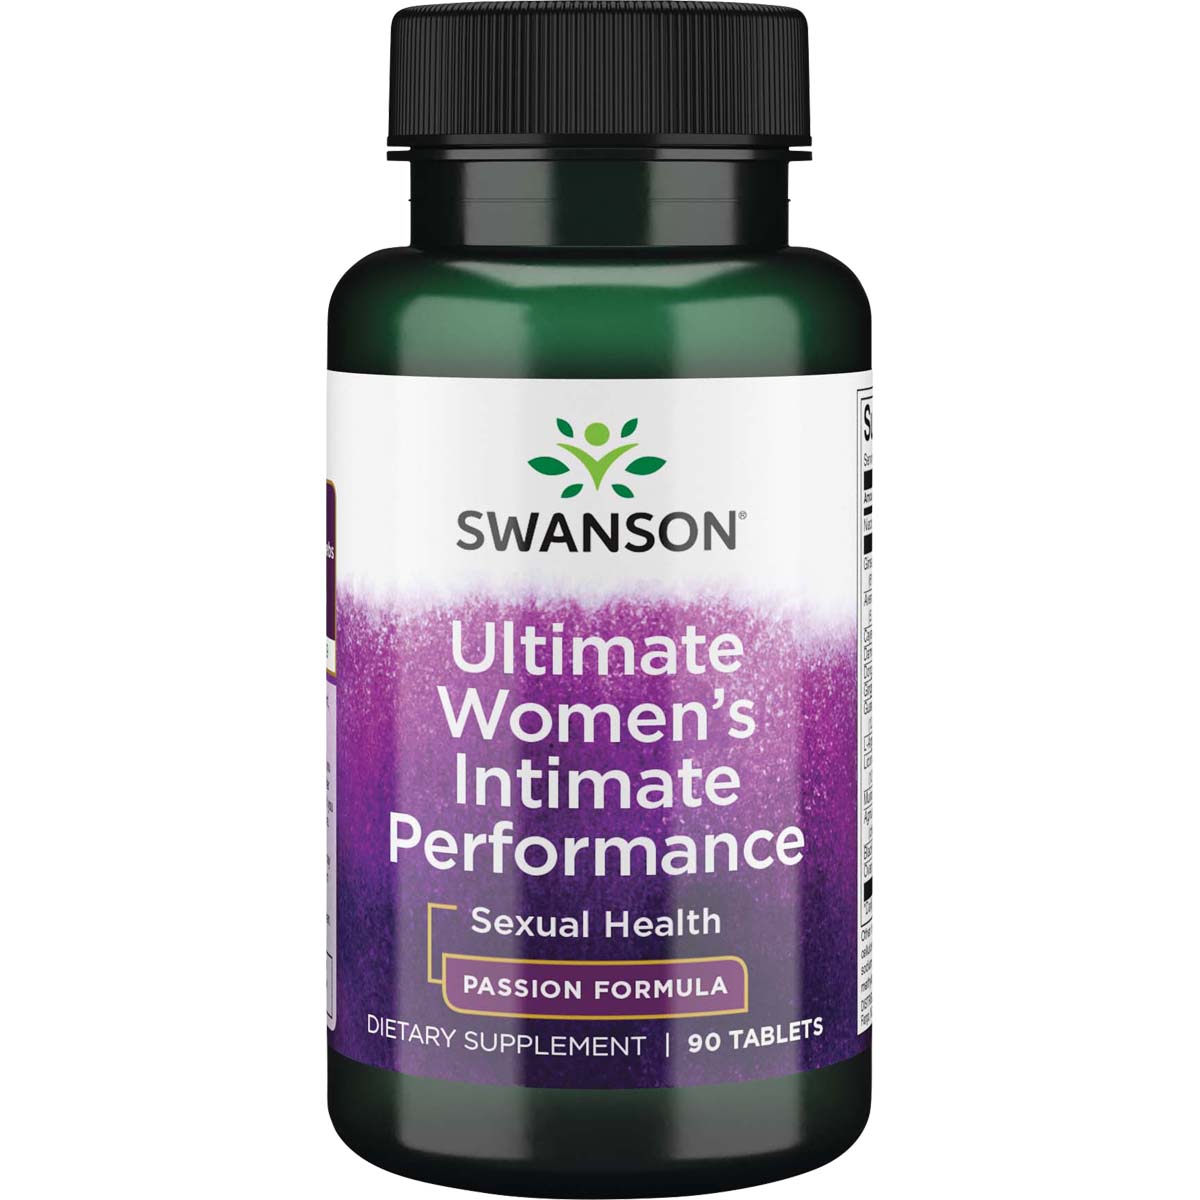 Swanson Ultimate Women's Intimate Performance 90 Tablets